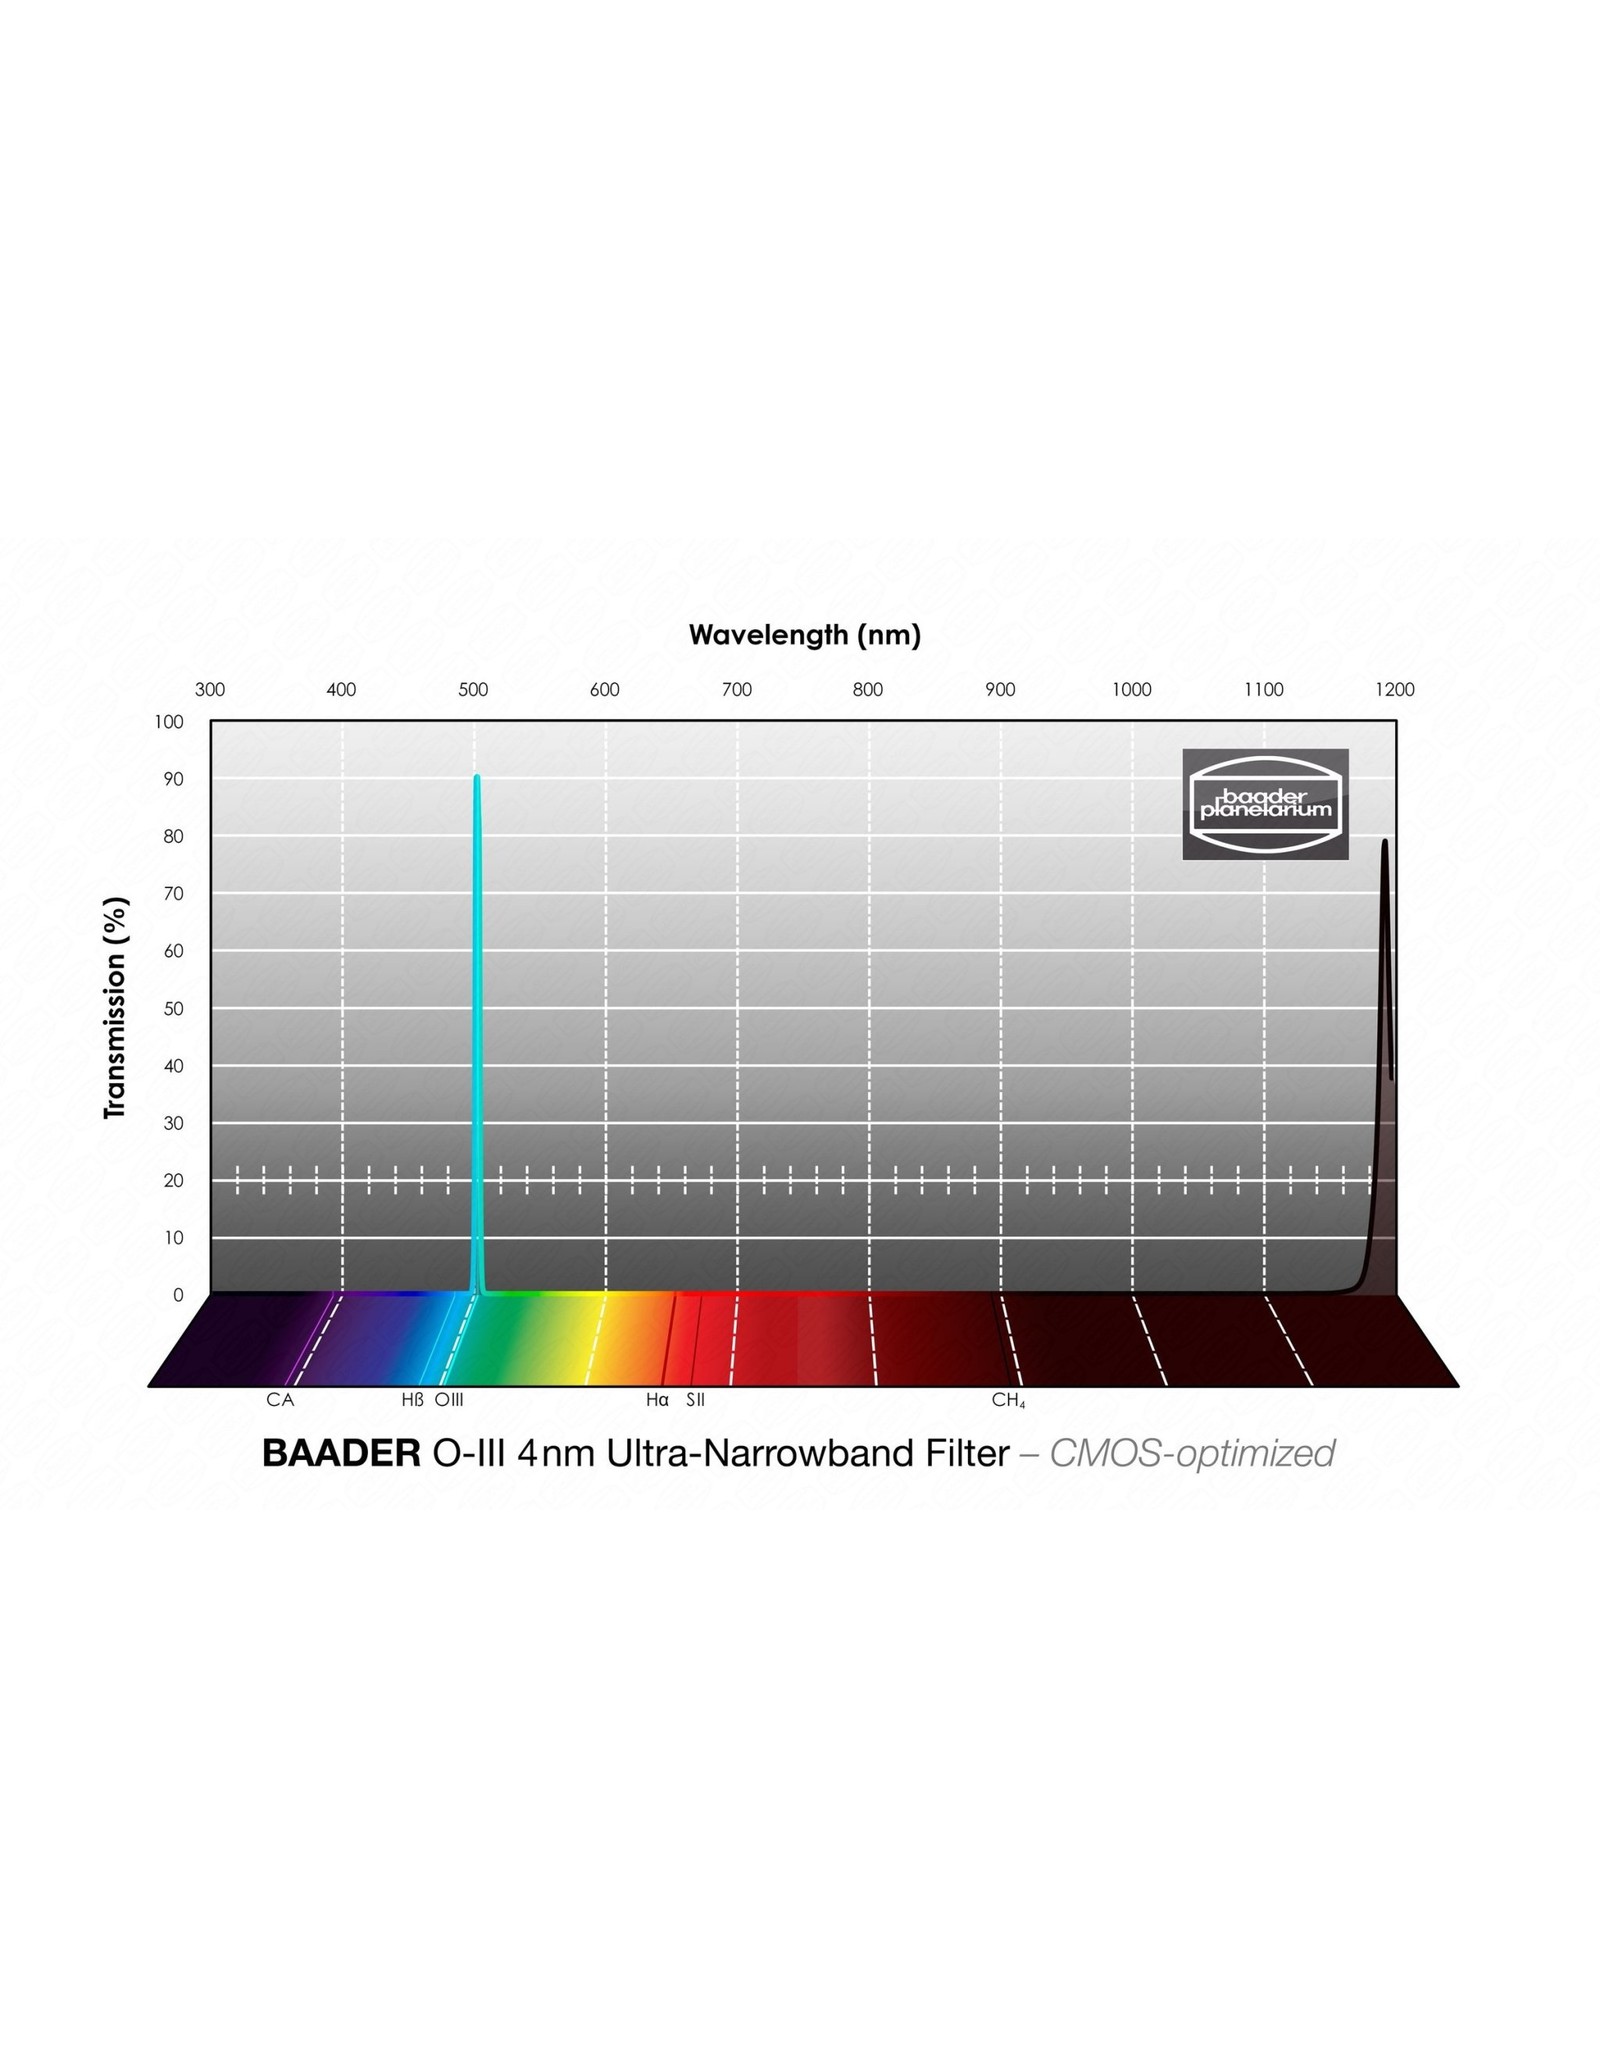 Baader Planetarium Baader 4nm Ultra-Narrowband Oxygen-III Filters – CMOS-optimized (Specify Size)